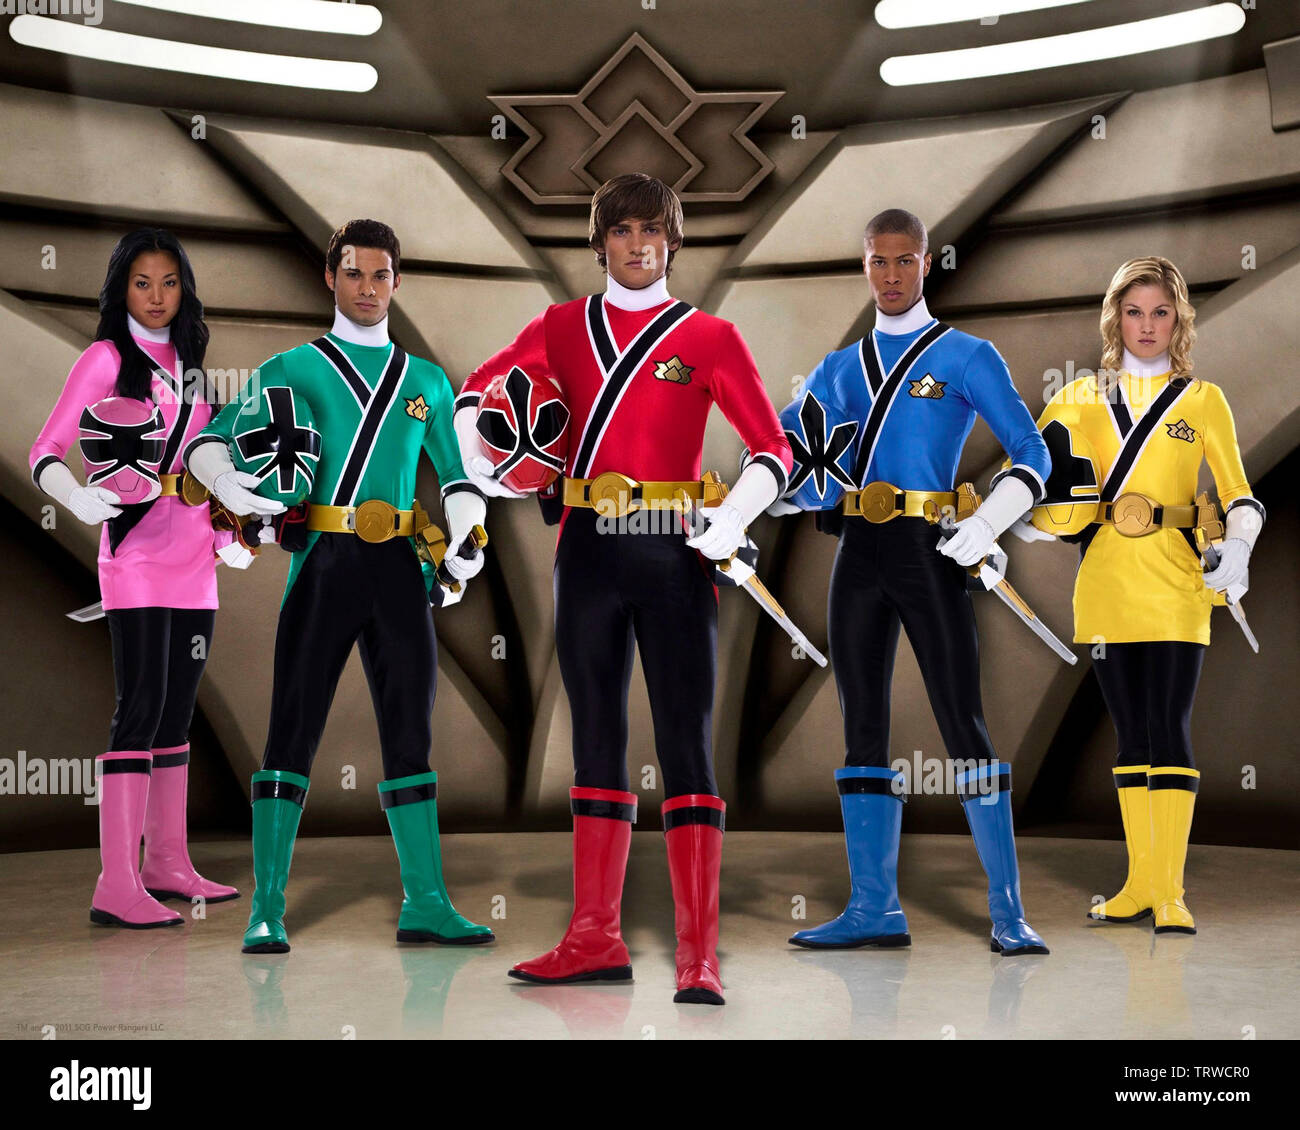 https://c8.alamy.com/comp/TRWCR0/alex-heartman-erika-fong-hector-david-jr-najee-de-tiege-and-brittany-anne-pirtle-in-power-rangers-samurai-tv-2011-copyright-editorial-use-only-no-merchandising-or-book-covers-this-is-a-publicly-distributed-handout-access-rights-only-no-license-of-copyright-provided-only-to-be-reproduced-in-conjunction-with-promotion-of-this-film-TRWCR0.jpg